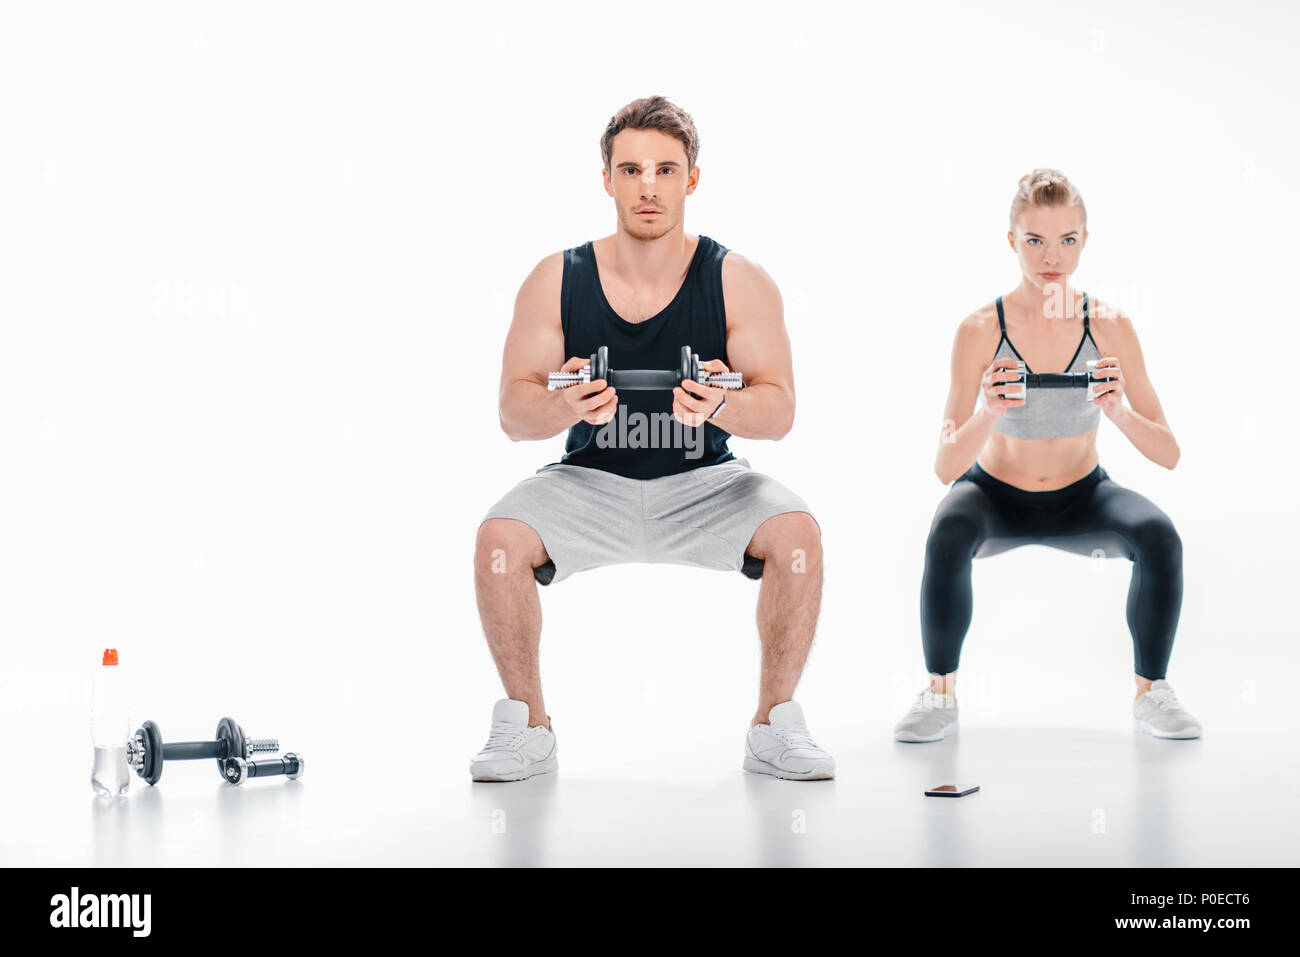 Yougn couple doing squats avec haltères isolated on white Banque D'Images